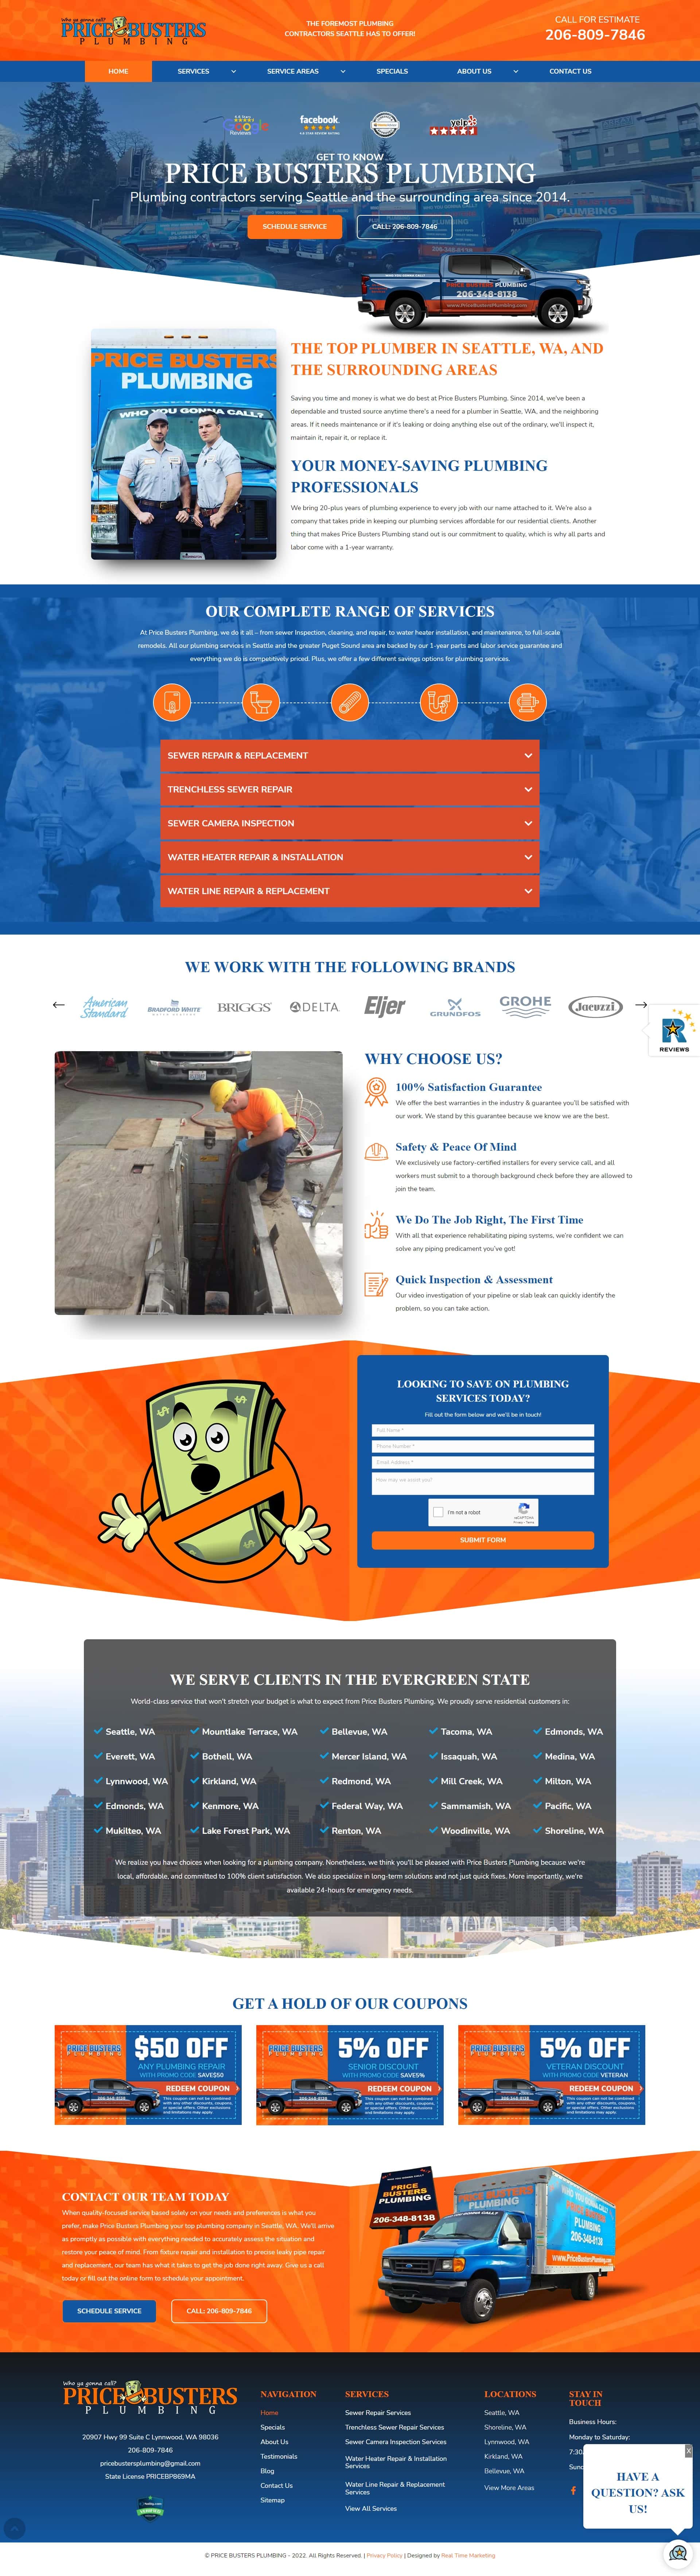 Price Busters Plumbing Web Page Design